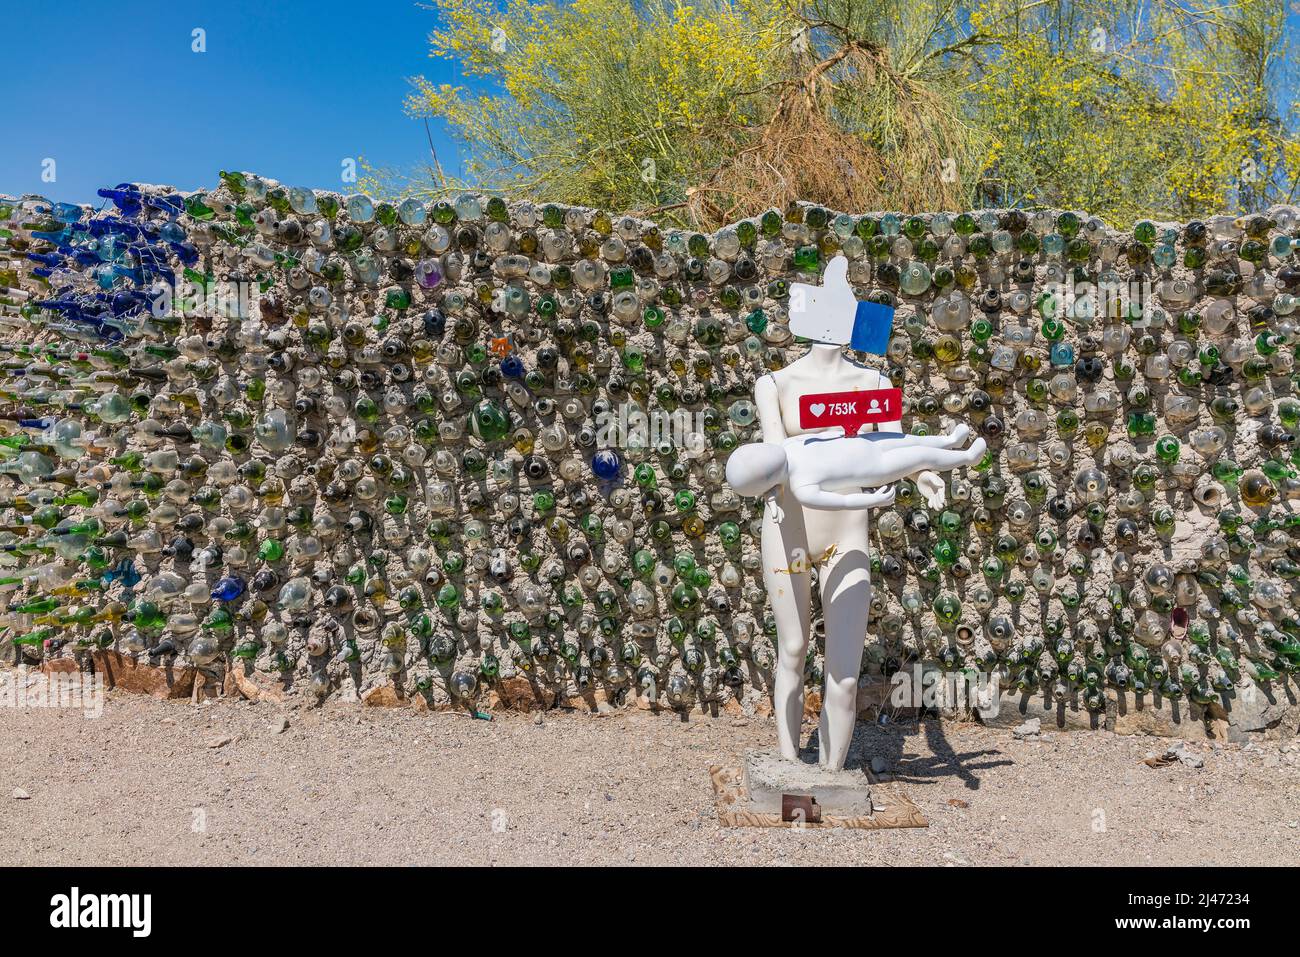 White figure sculpture holding baby in front of glass wall made of glass bottles in concrete in the settlement of East Jesus in Southern California. Stock Photo